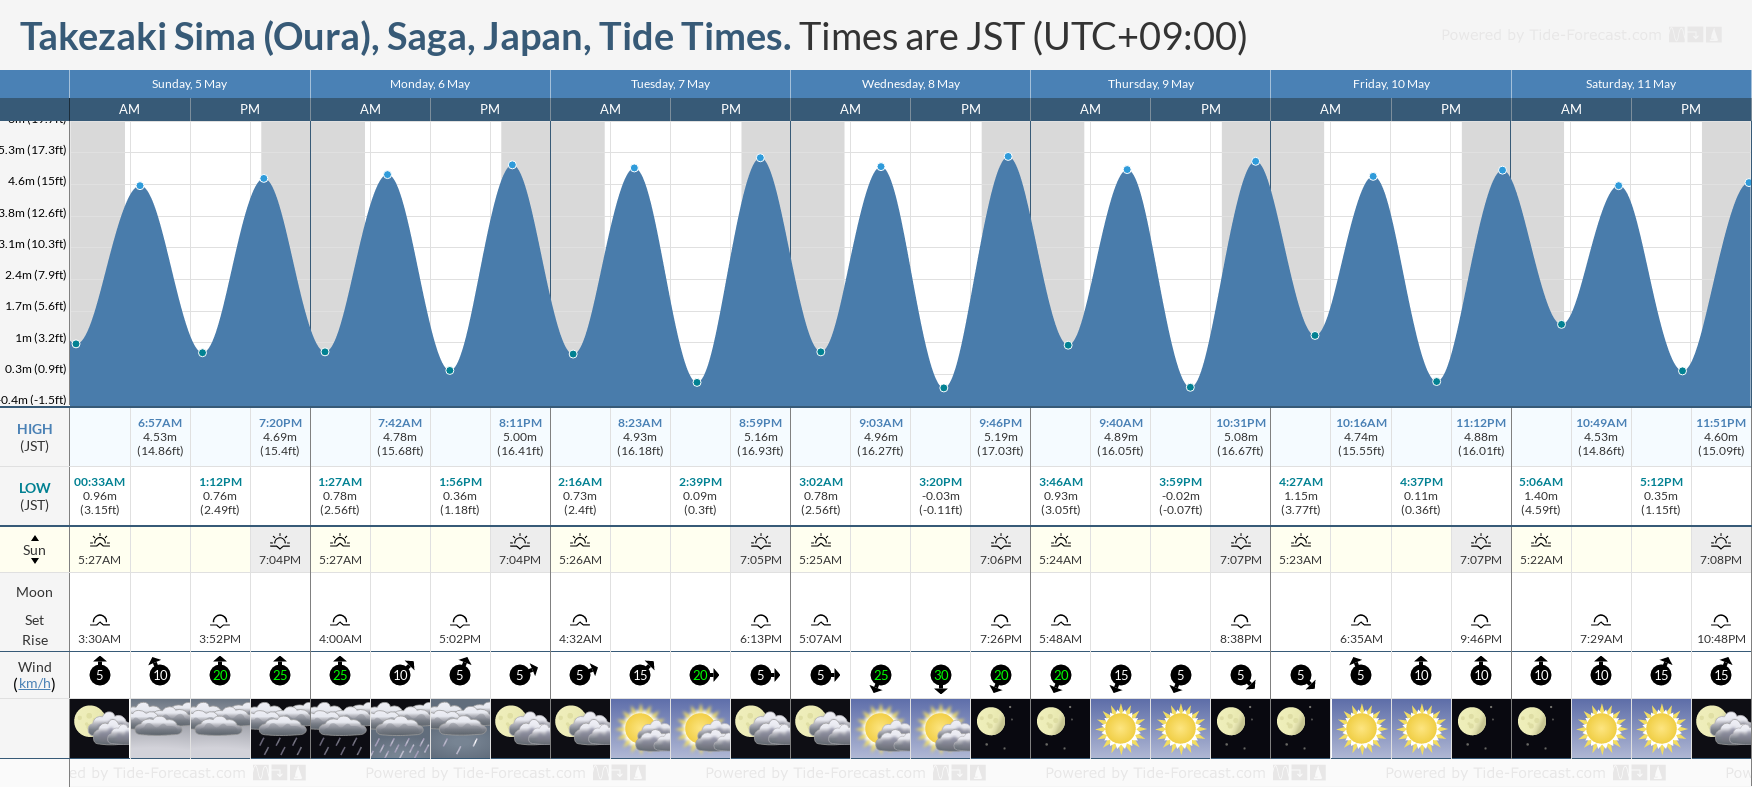 Takezaki Sima (Oura), Saga, Japan Tide Chart including high and low tide tide times for the next 7 days